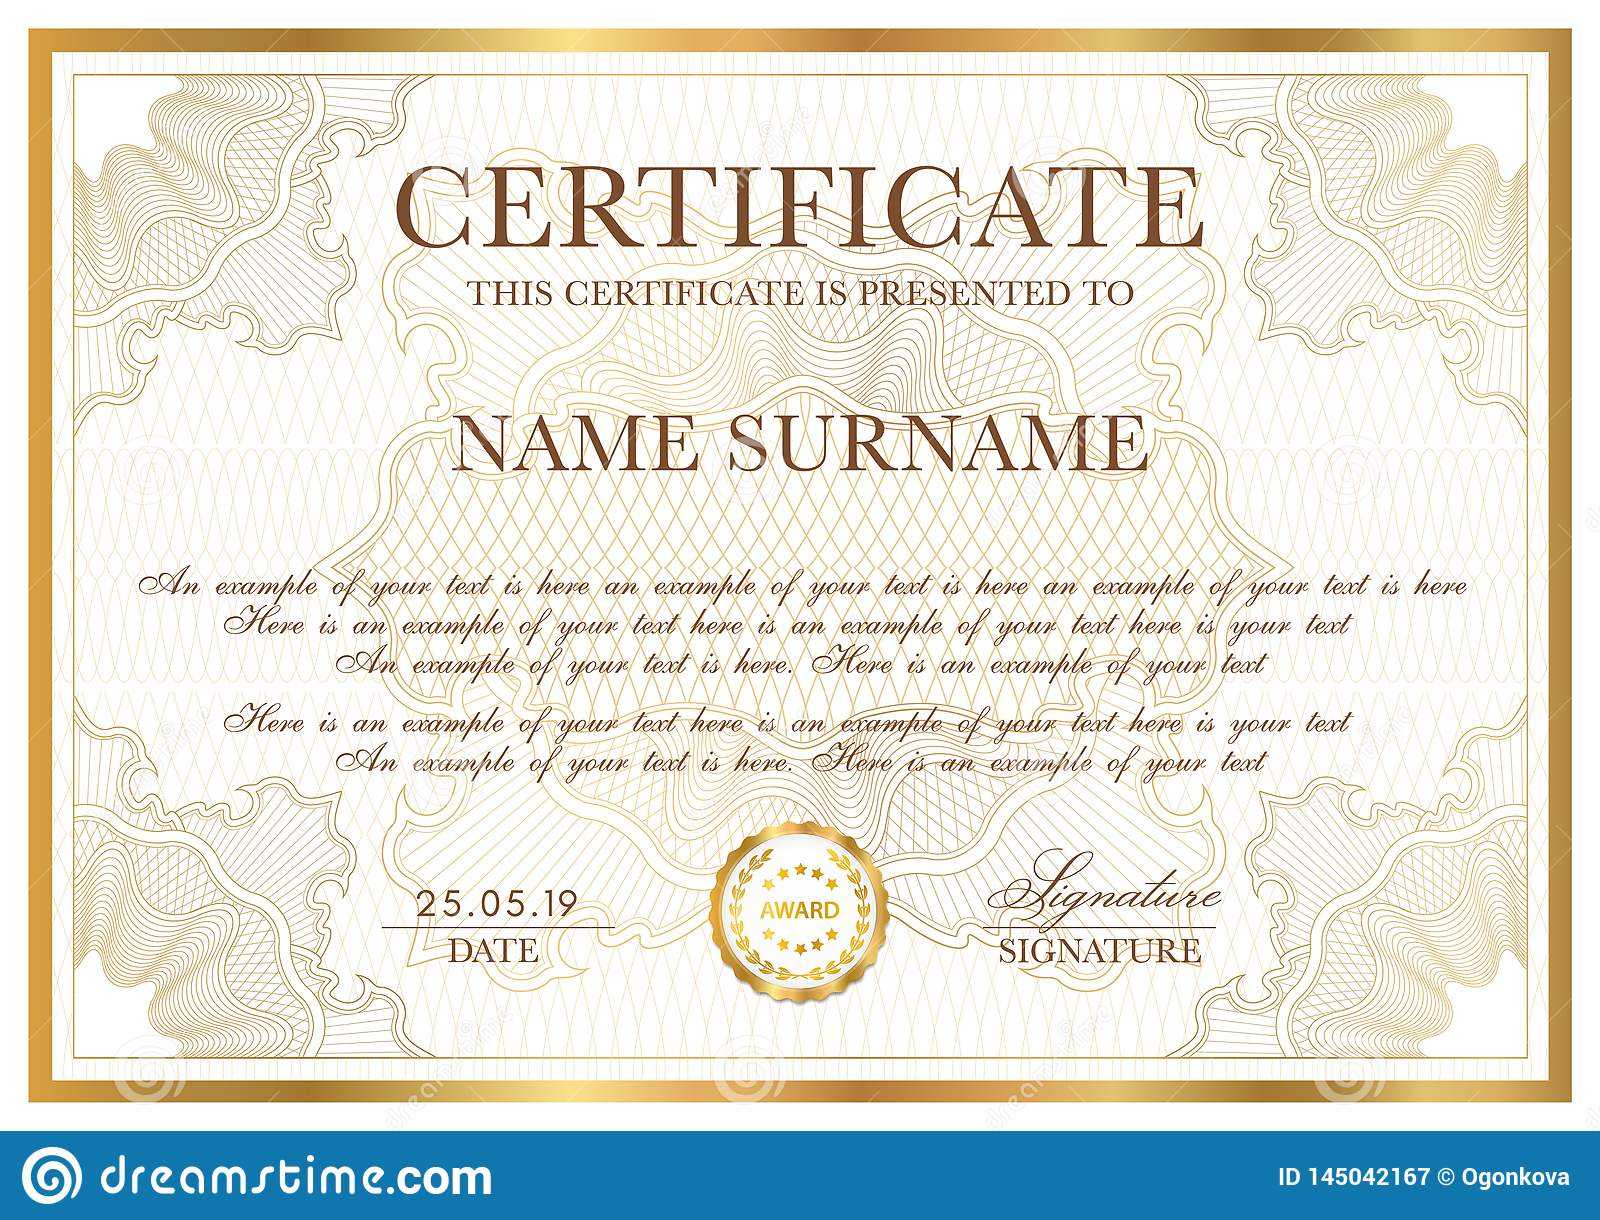 Certificate Template. Gold Border With Guilloche Pattern In Certificate Of Authenticity Template